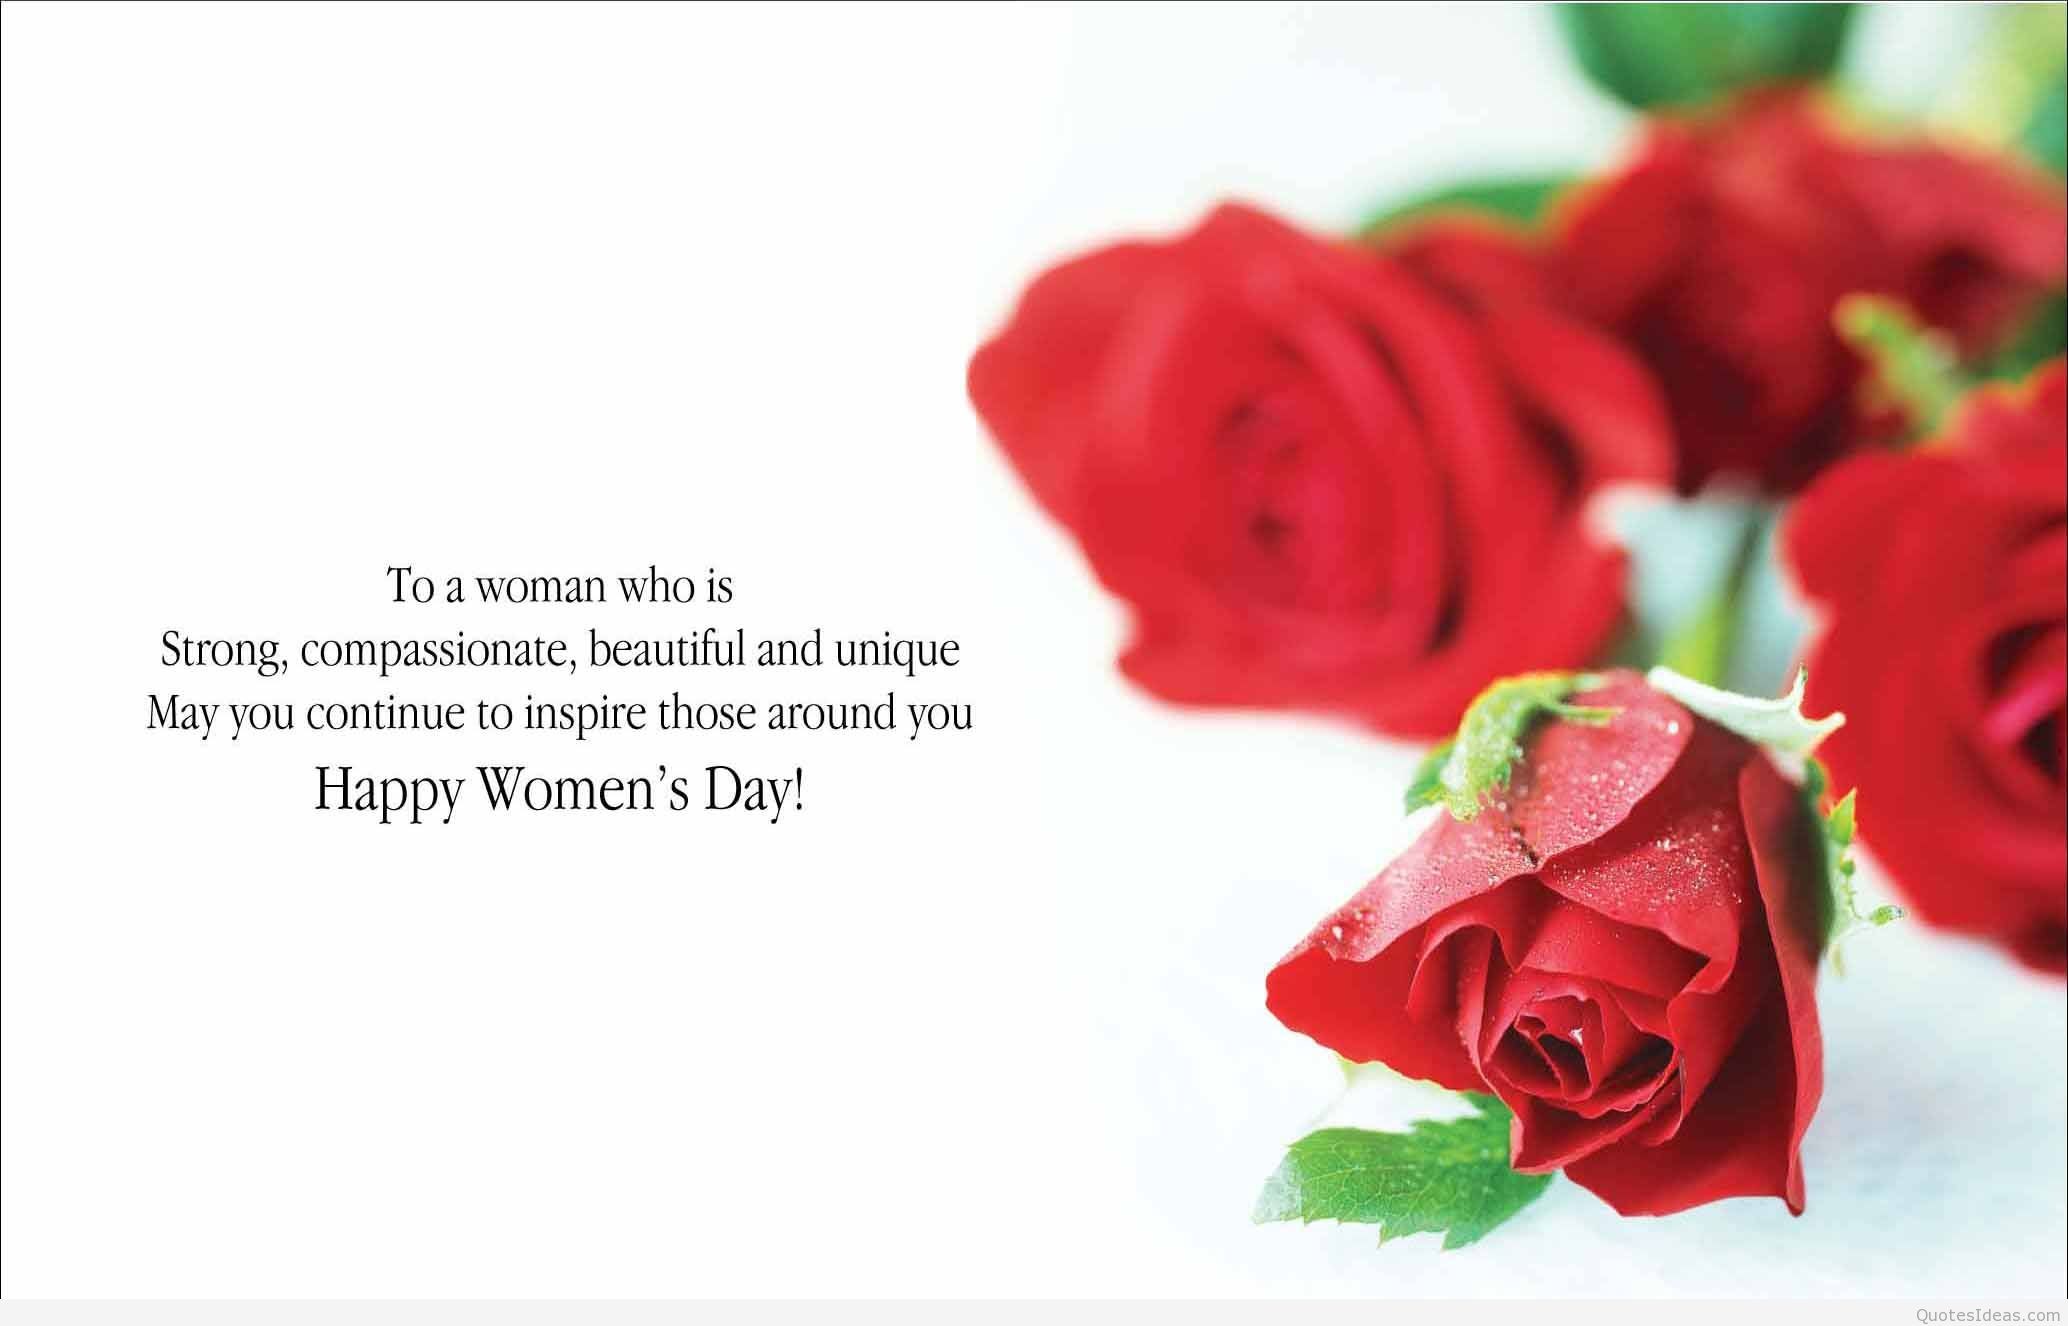 Holidays International Womens Day Congratulations on 8 March 020274 Happy Womens Day March 8 Wallpaper 2068×1299